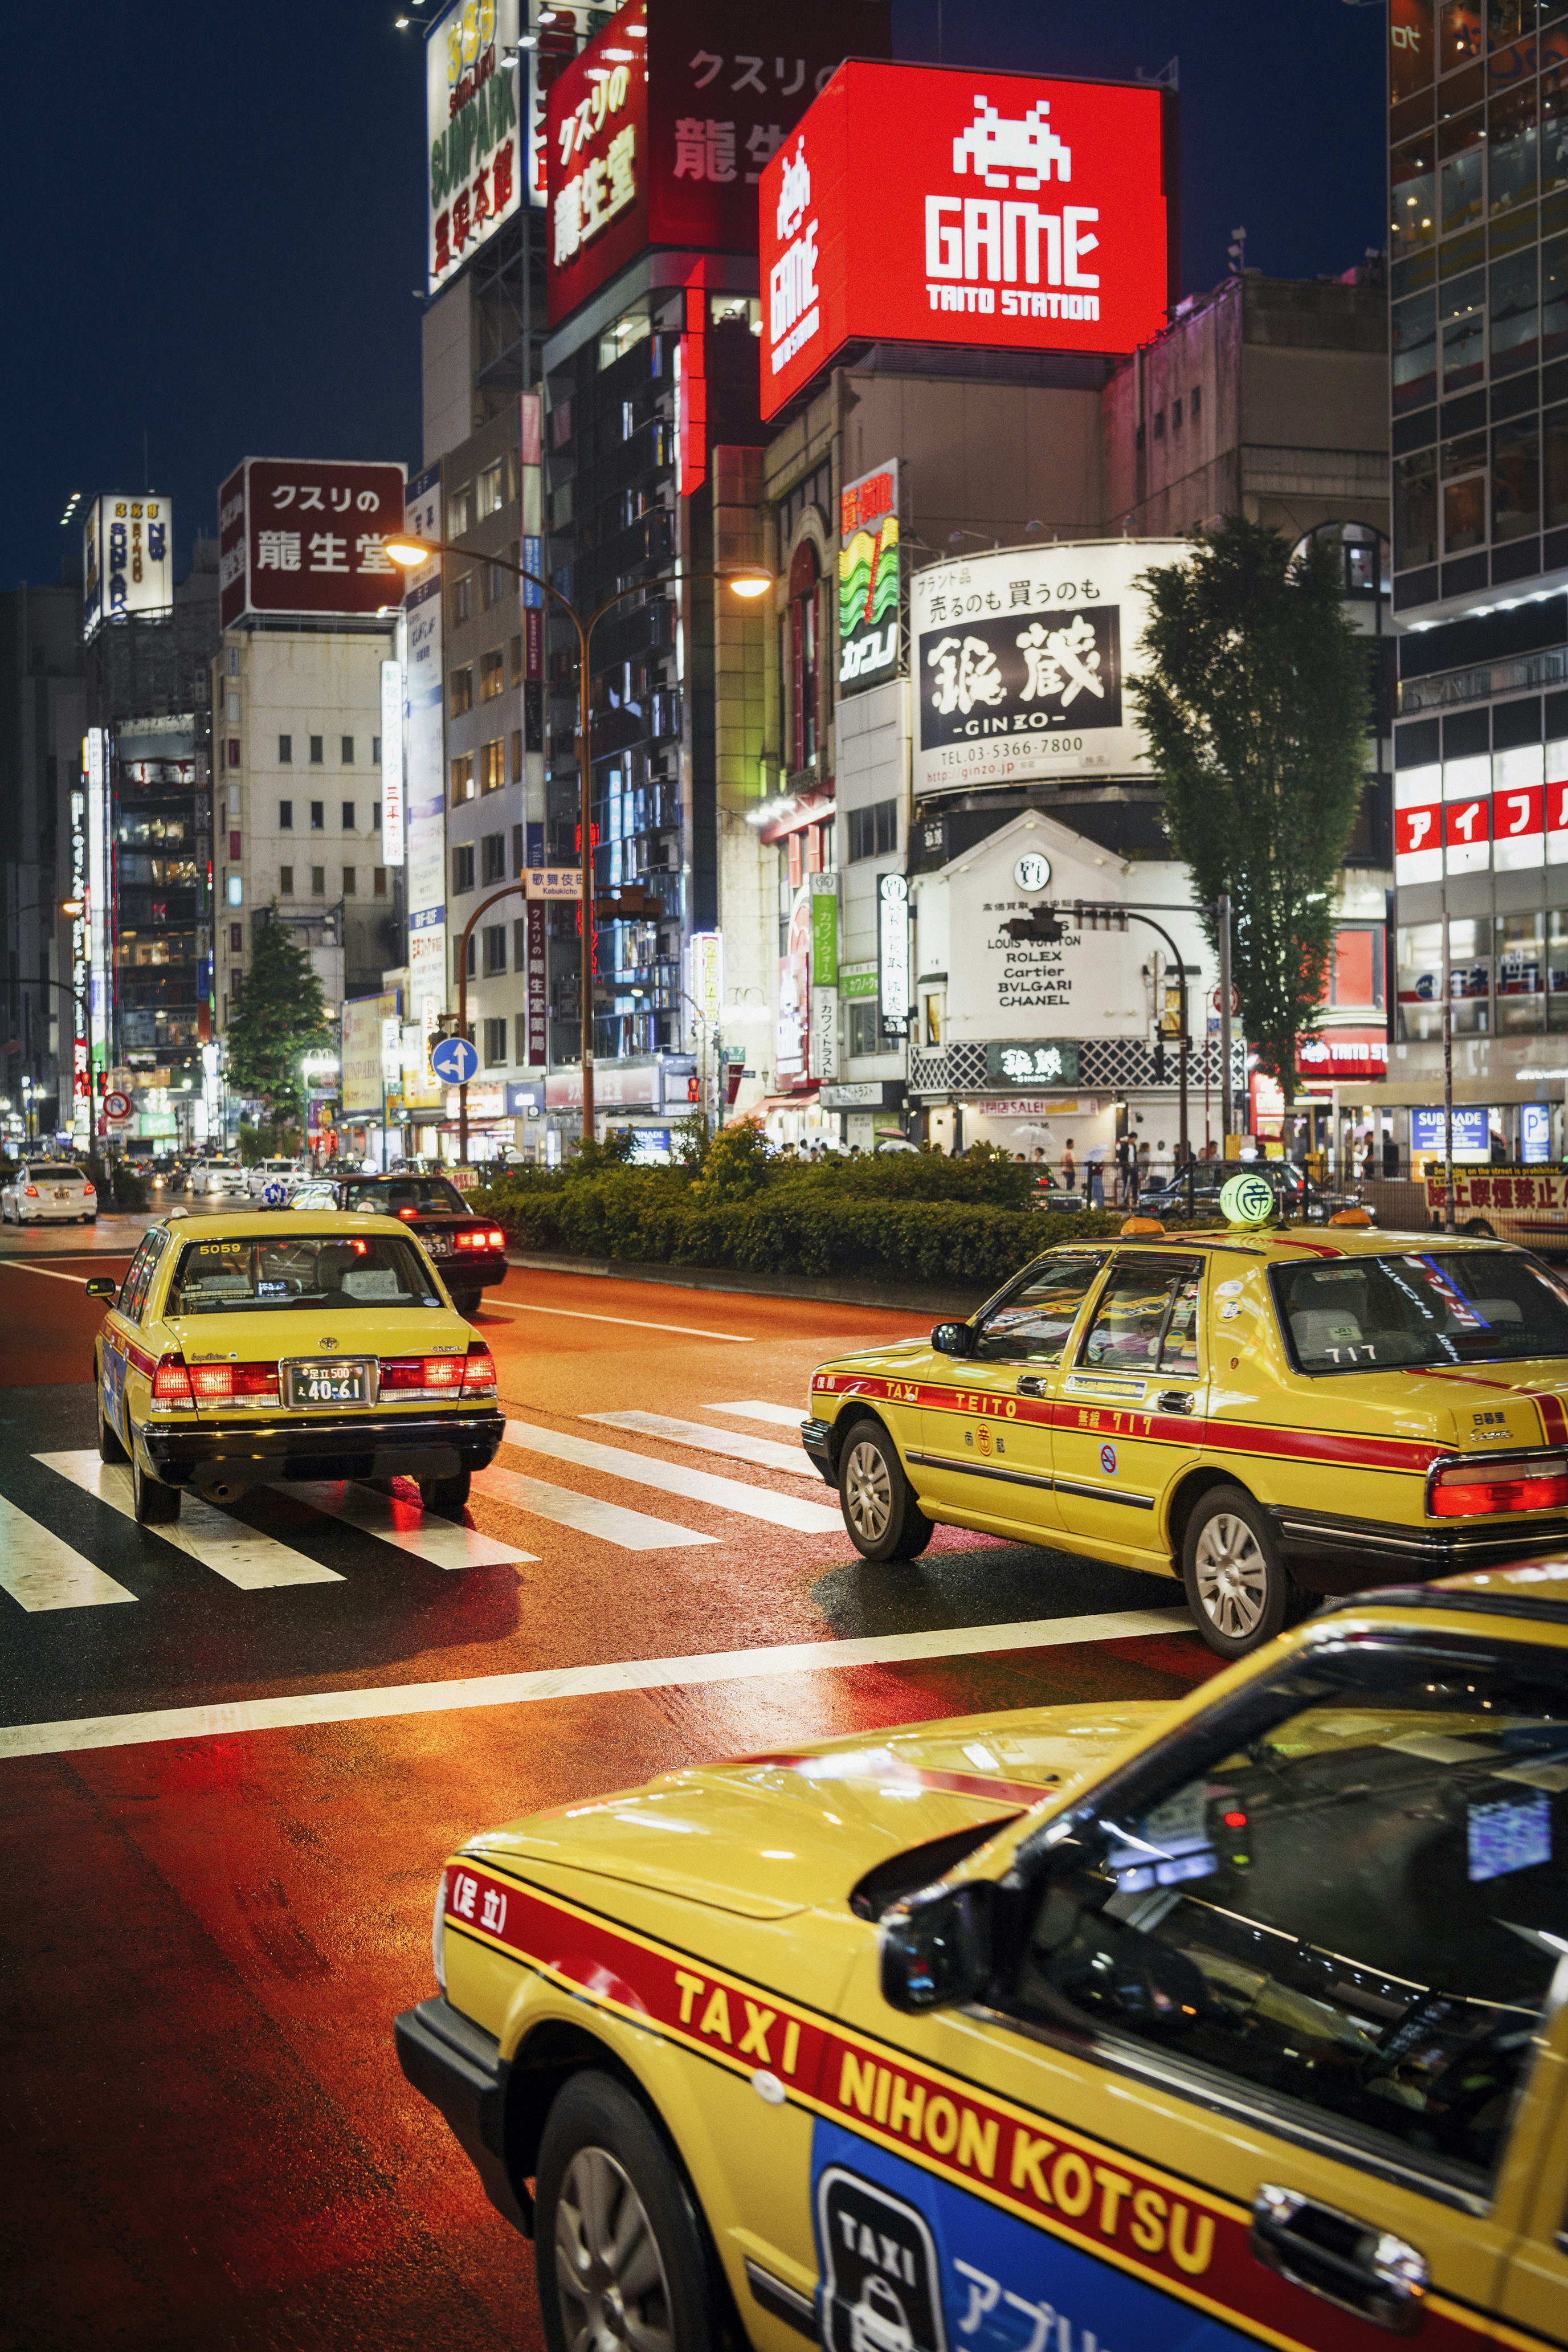 Taxis are making their way down a busy Tokyo street at night.